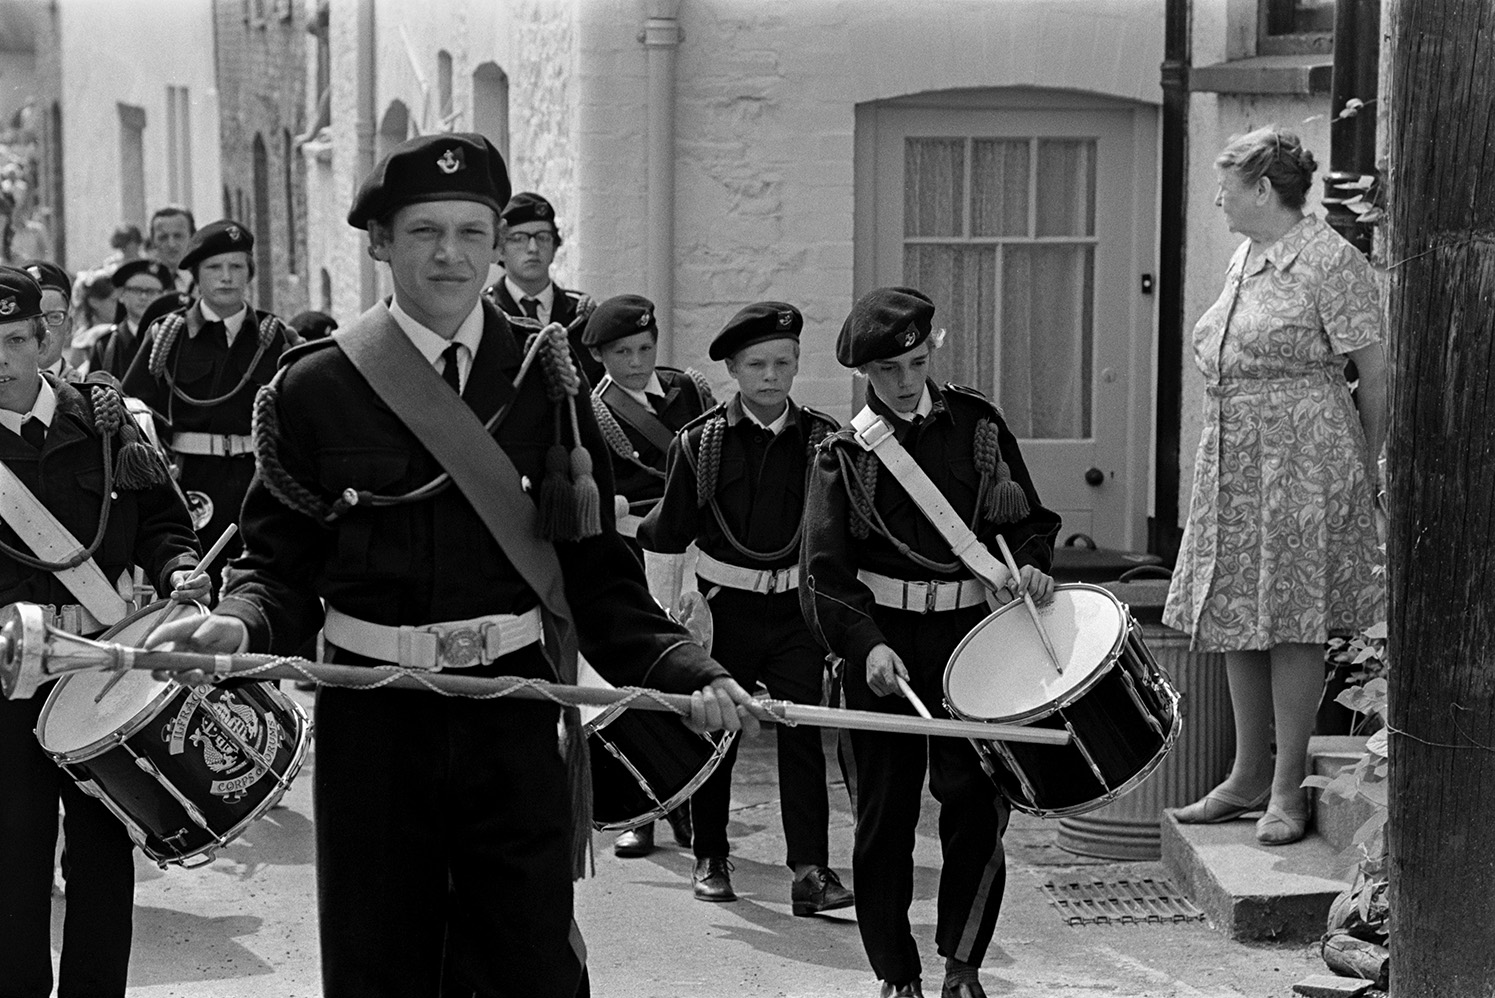 A woman watching a boys drum band parading through a street at Chulmleigh Fair. The boy leading the band is carrying a large mace.